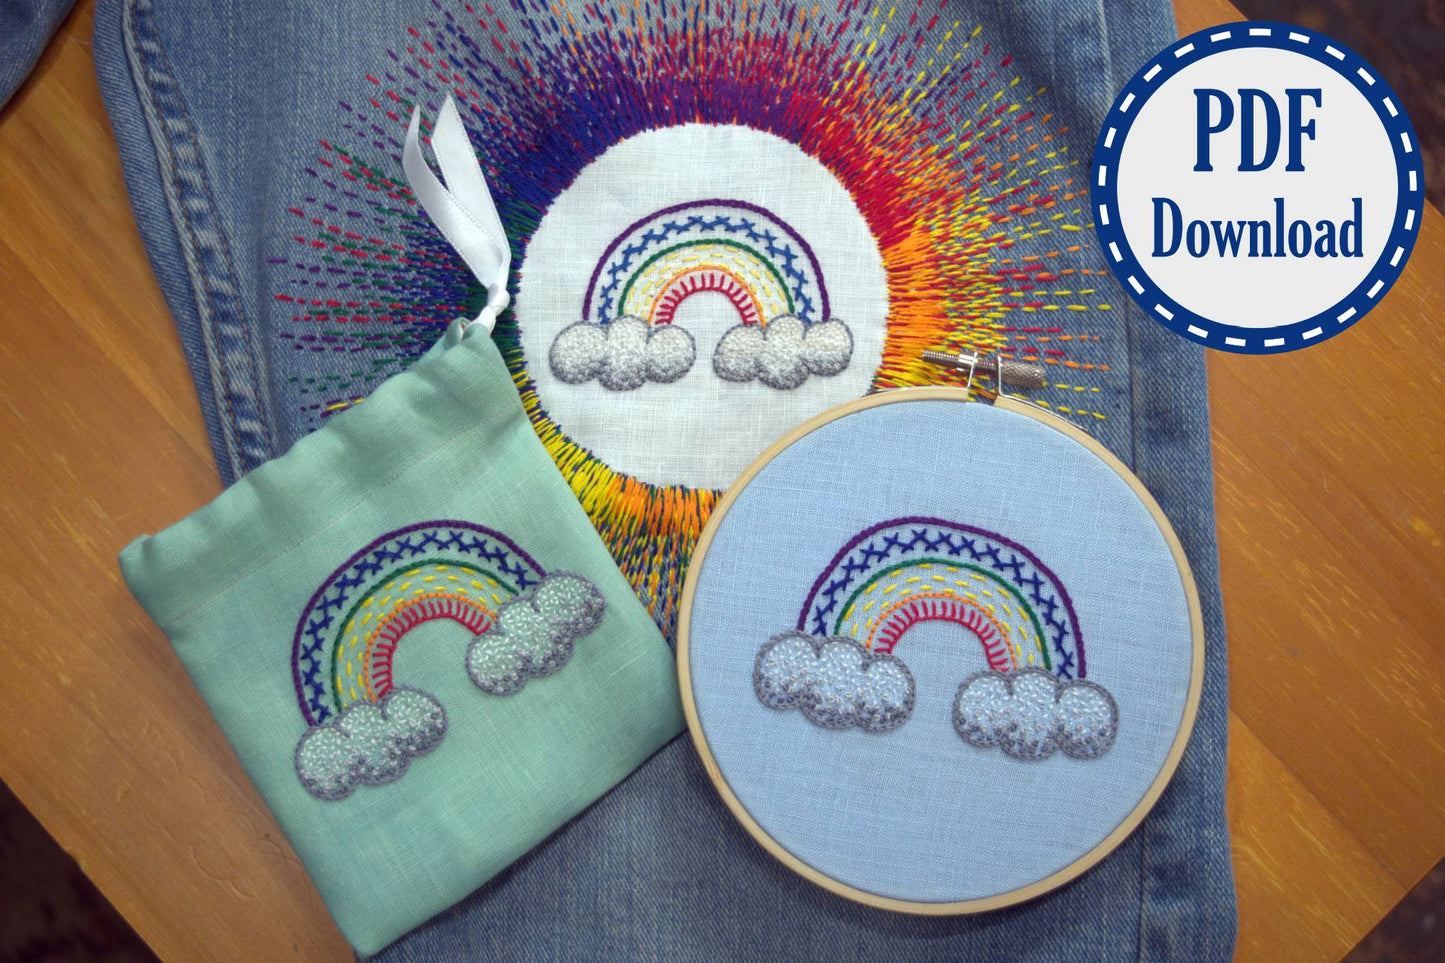 Three embroidered rainbows of the same design - one framed in hoop, one on small pouch, and one appliqued to a pair of jeans with sunburst of rainbow stitches